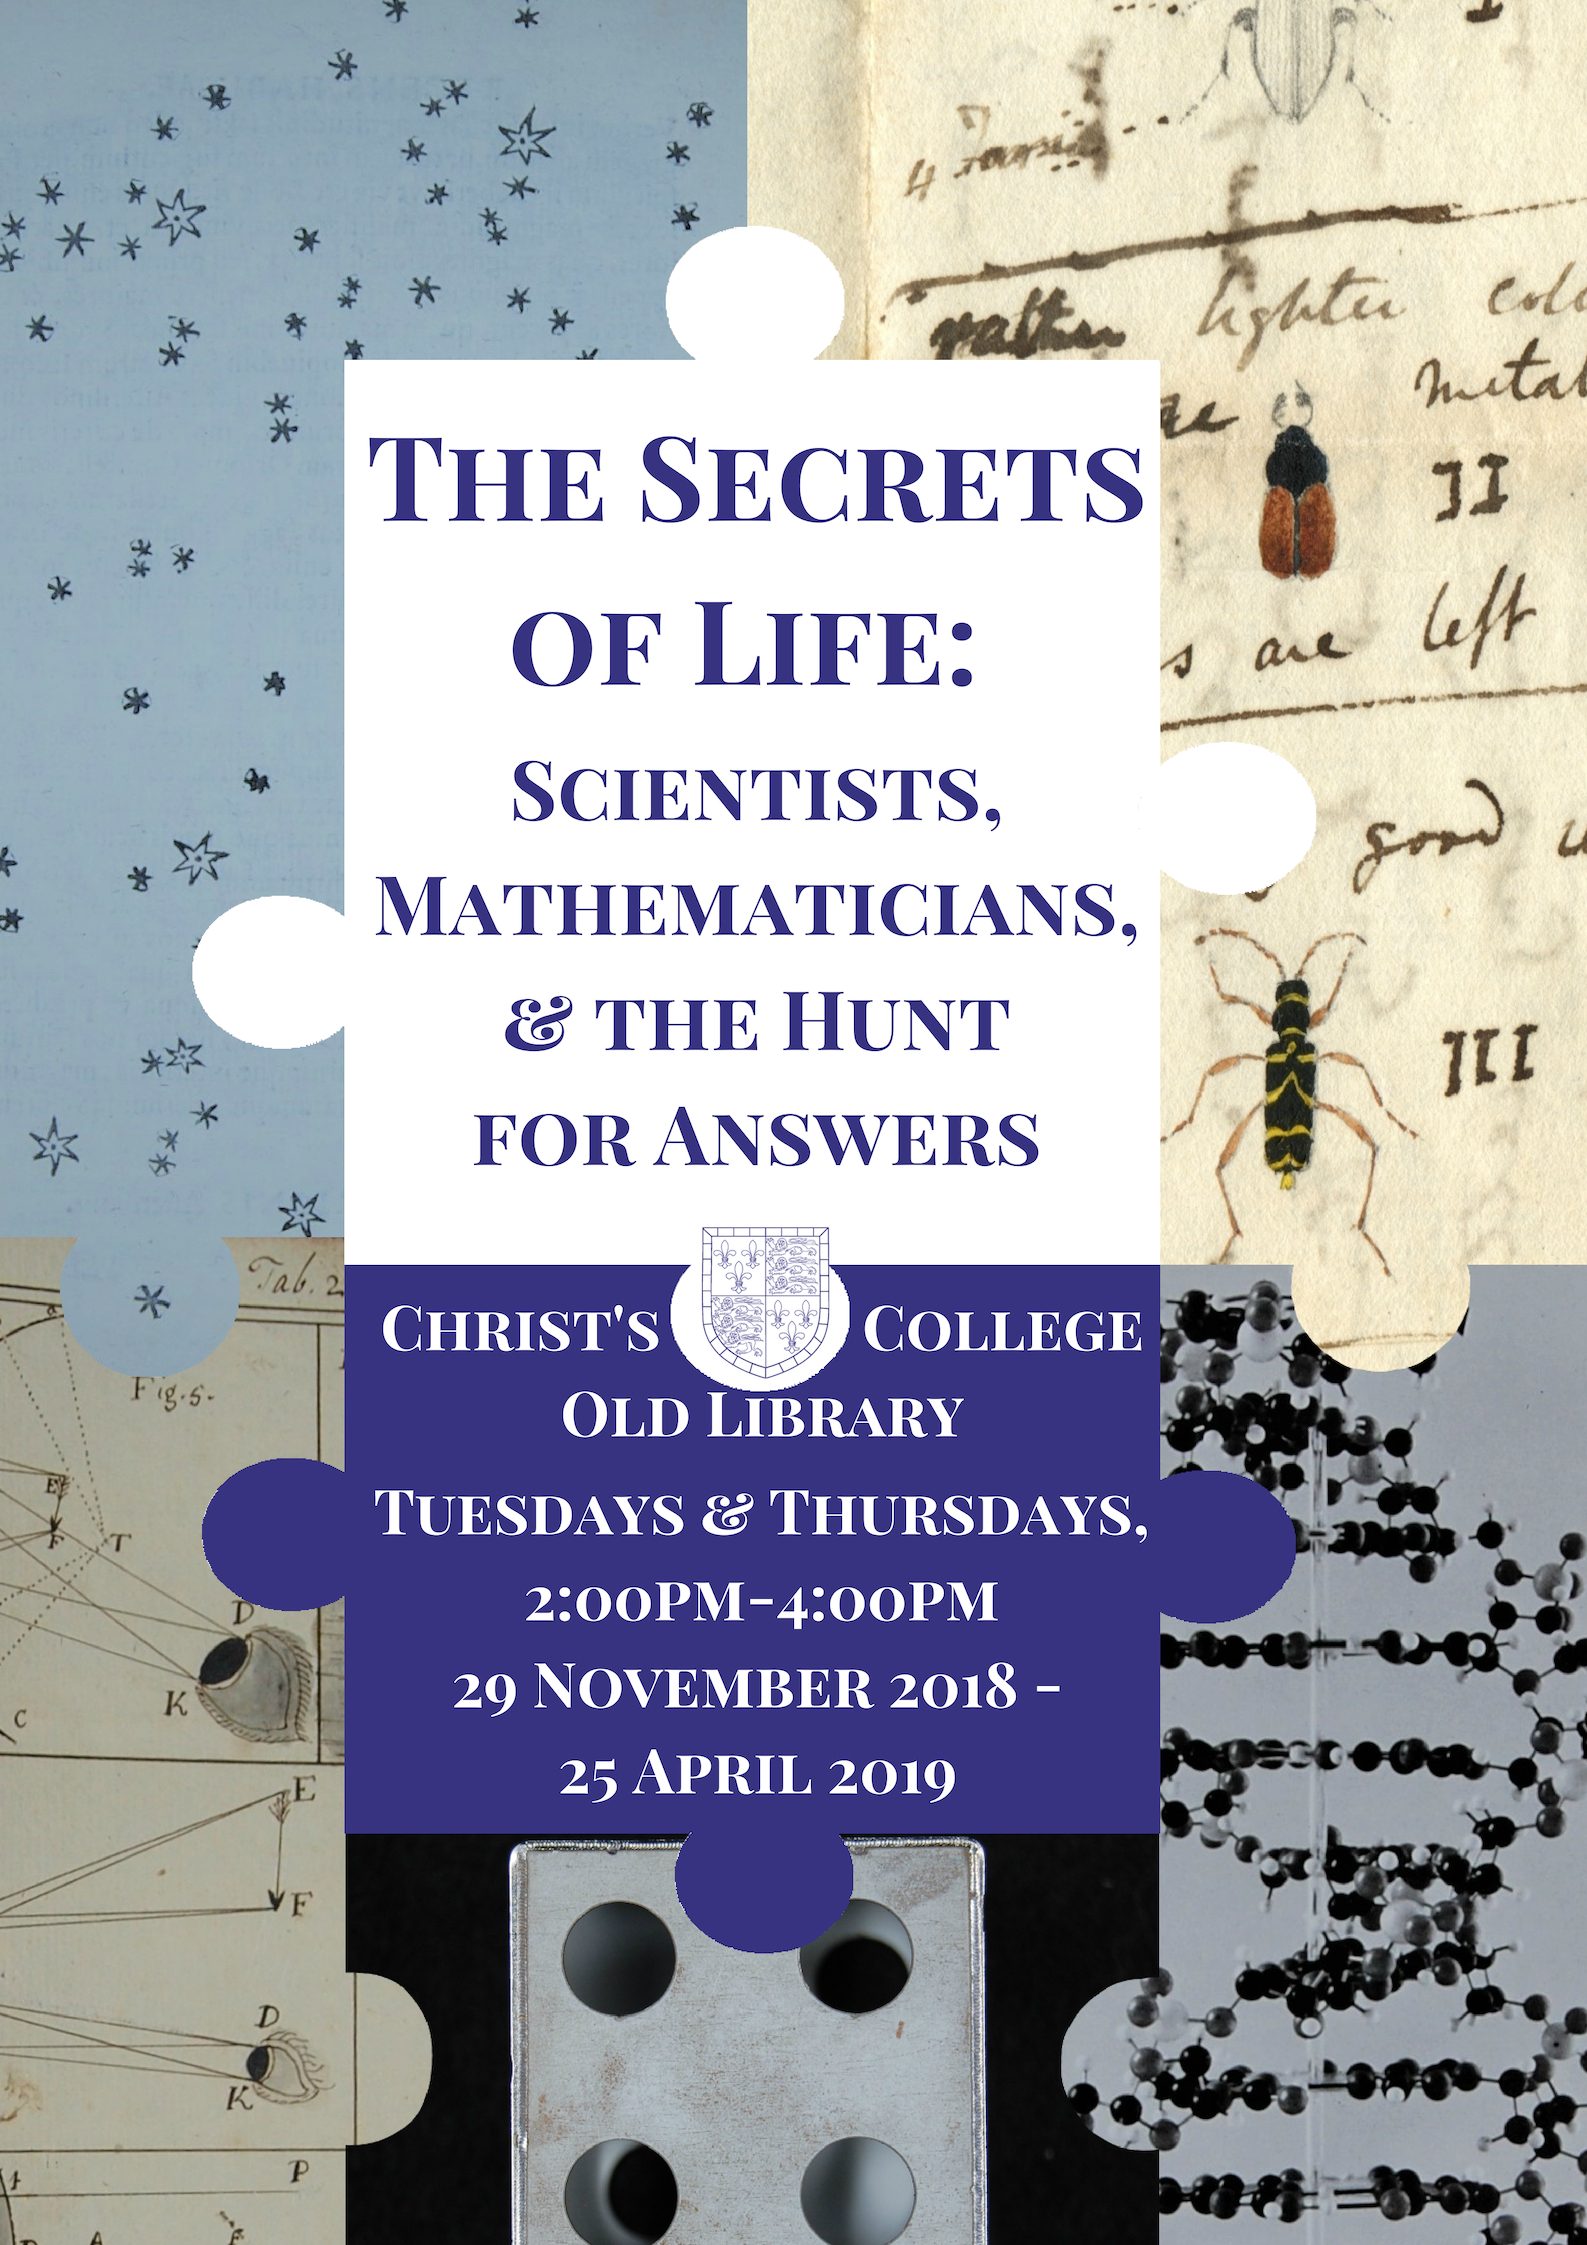 Advertising poster for the exhibition titled The Secrets of Life: Scientists, Mathematicians, & the Hunt for Answers